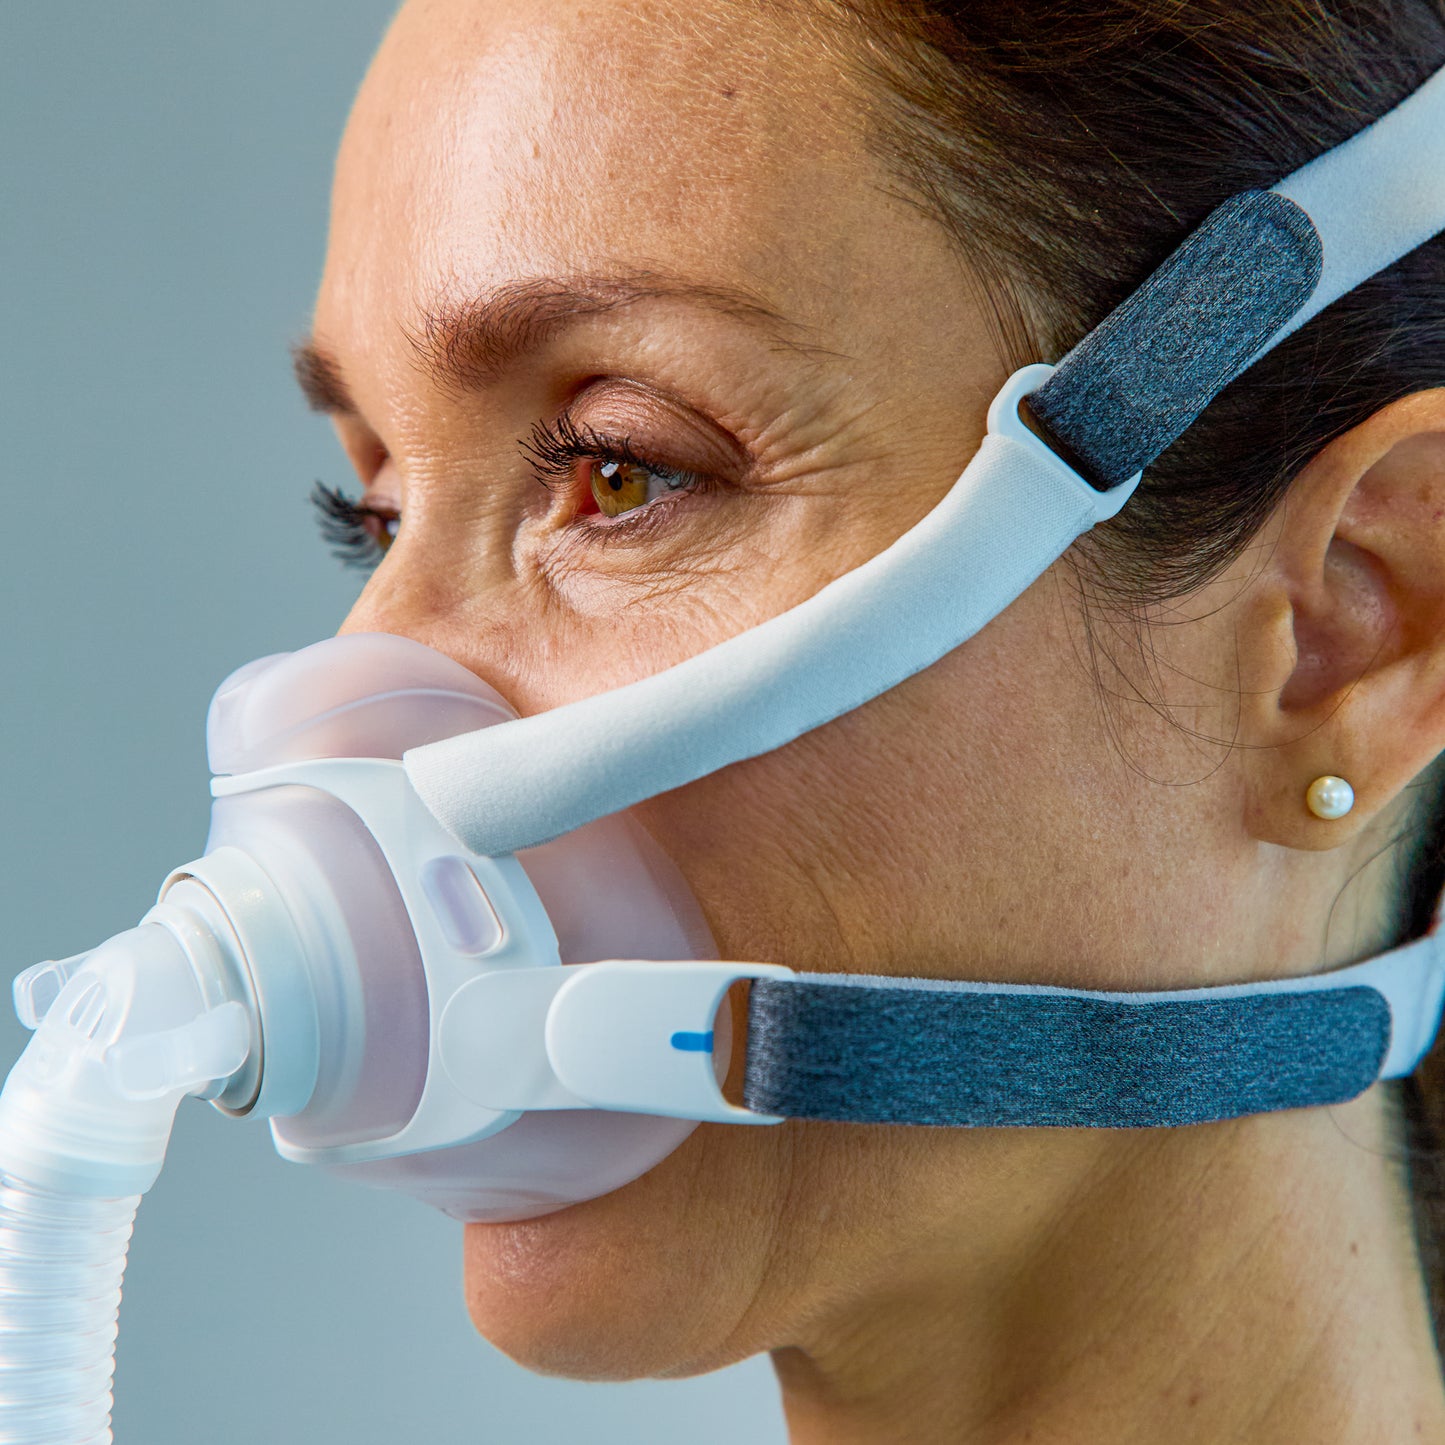 ResMed AirFit F40 Full Face CPAP Mask with Headgear